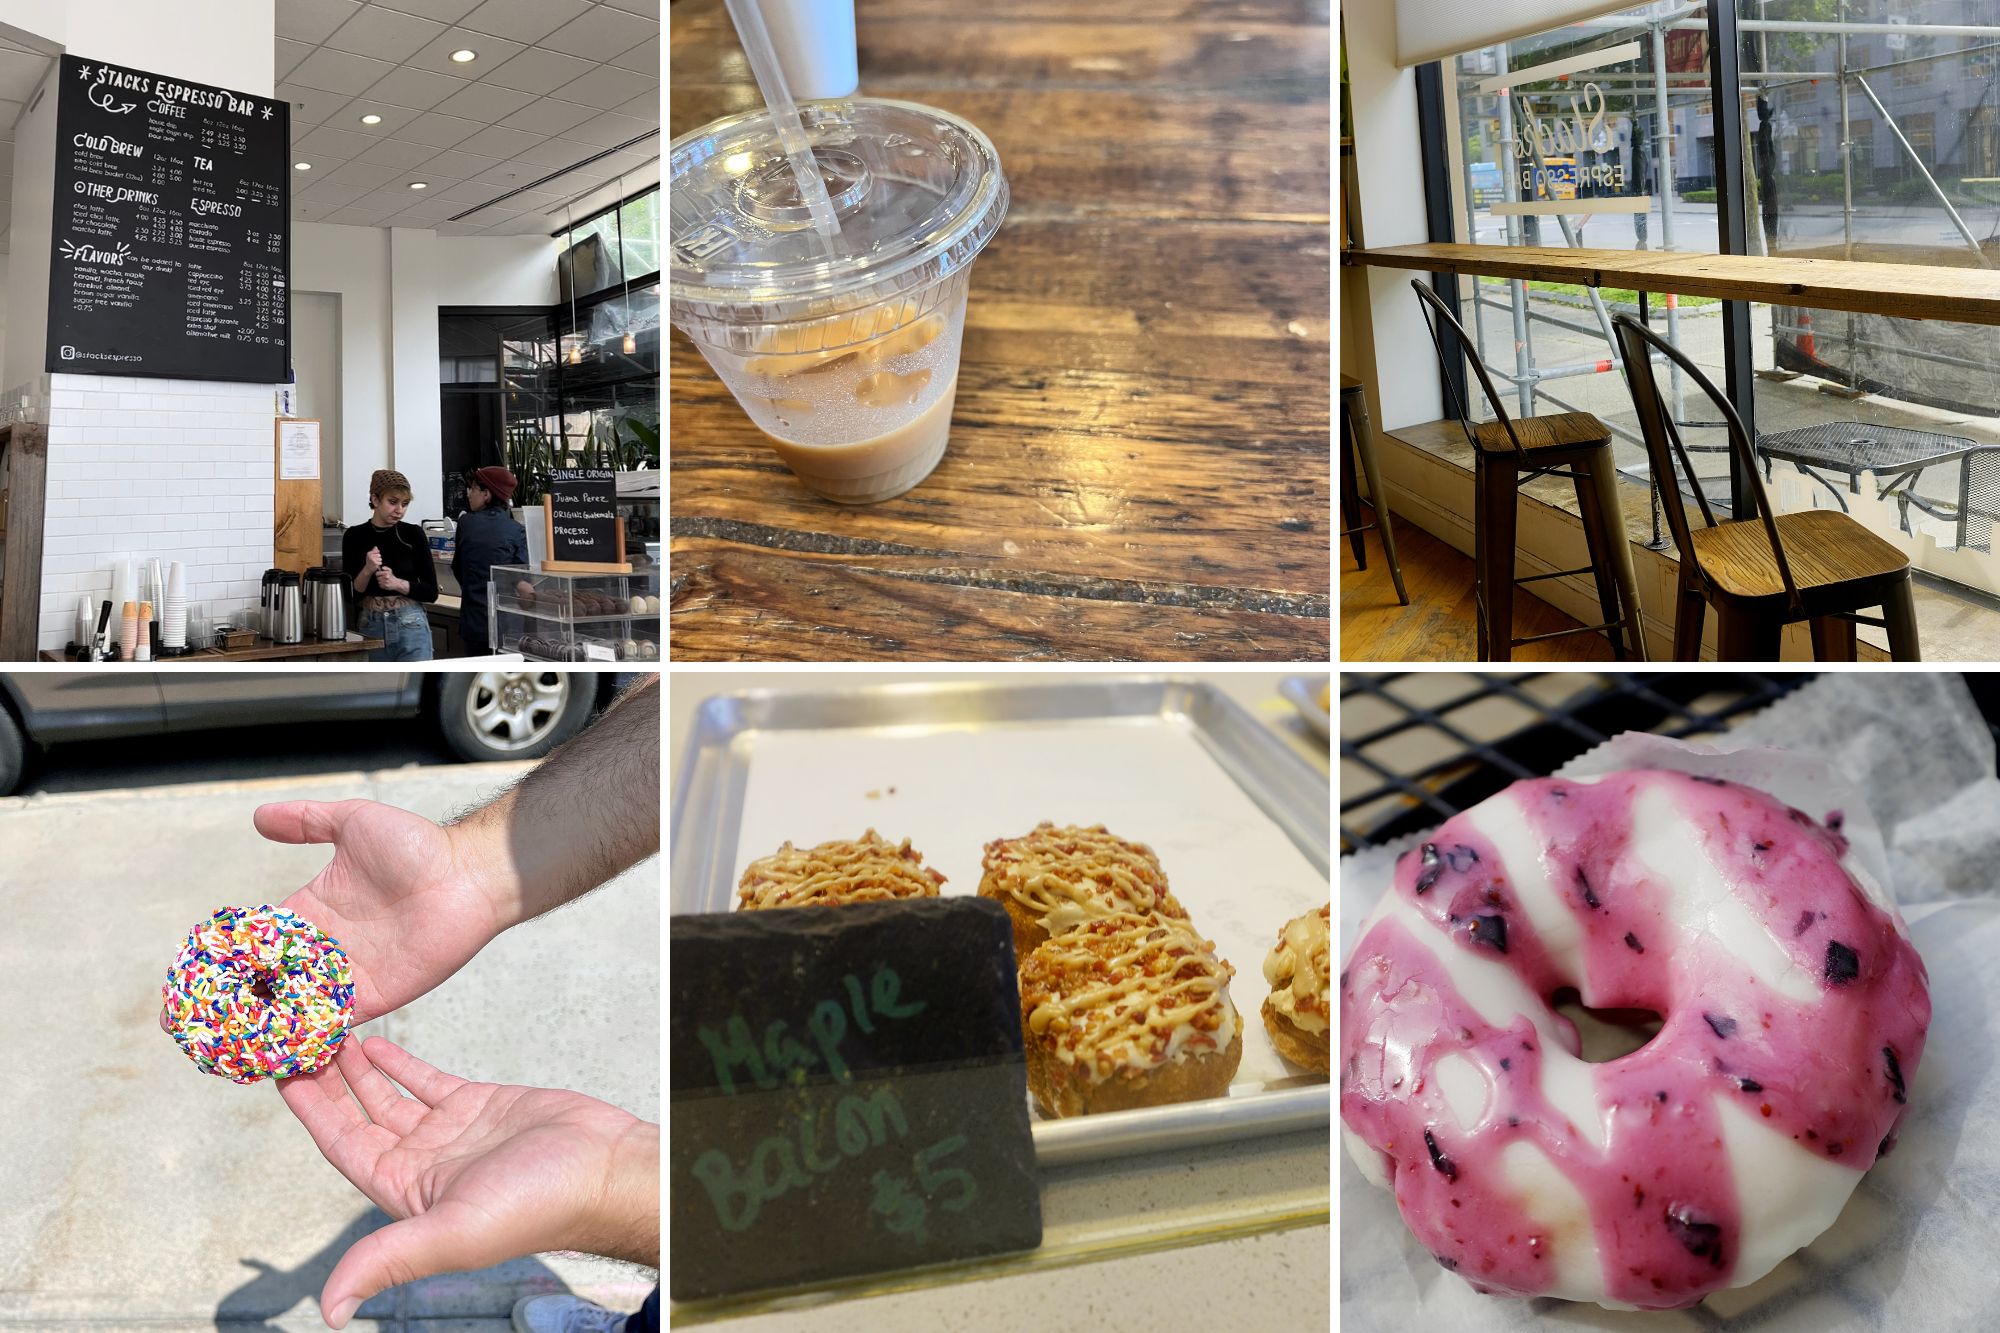 A collage of images from Stacks Espresso Bar and Cider Belly Doughnuts 